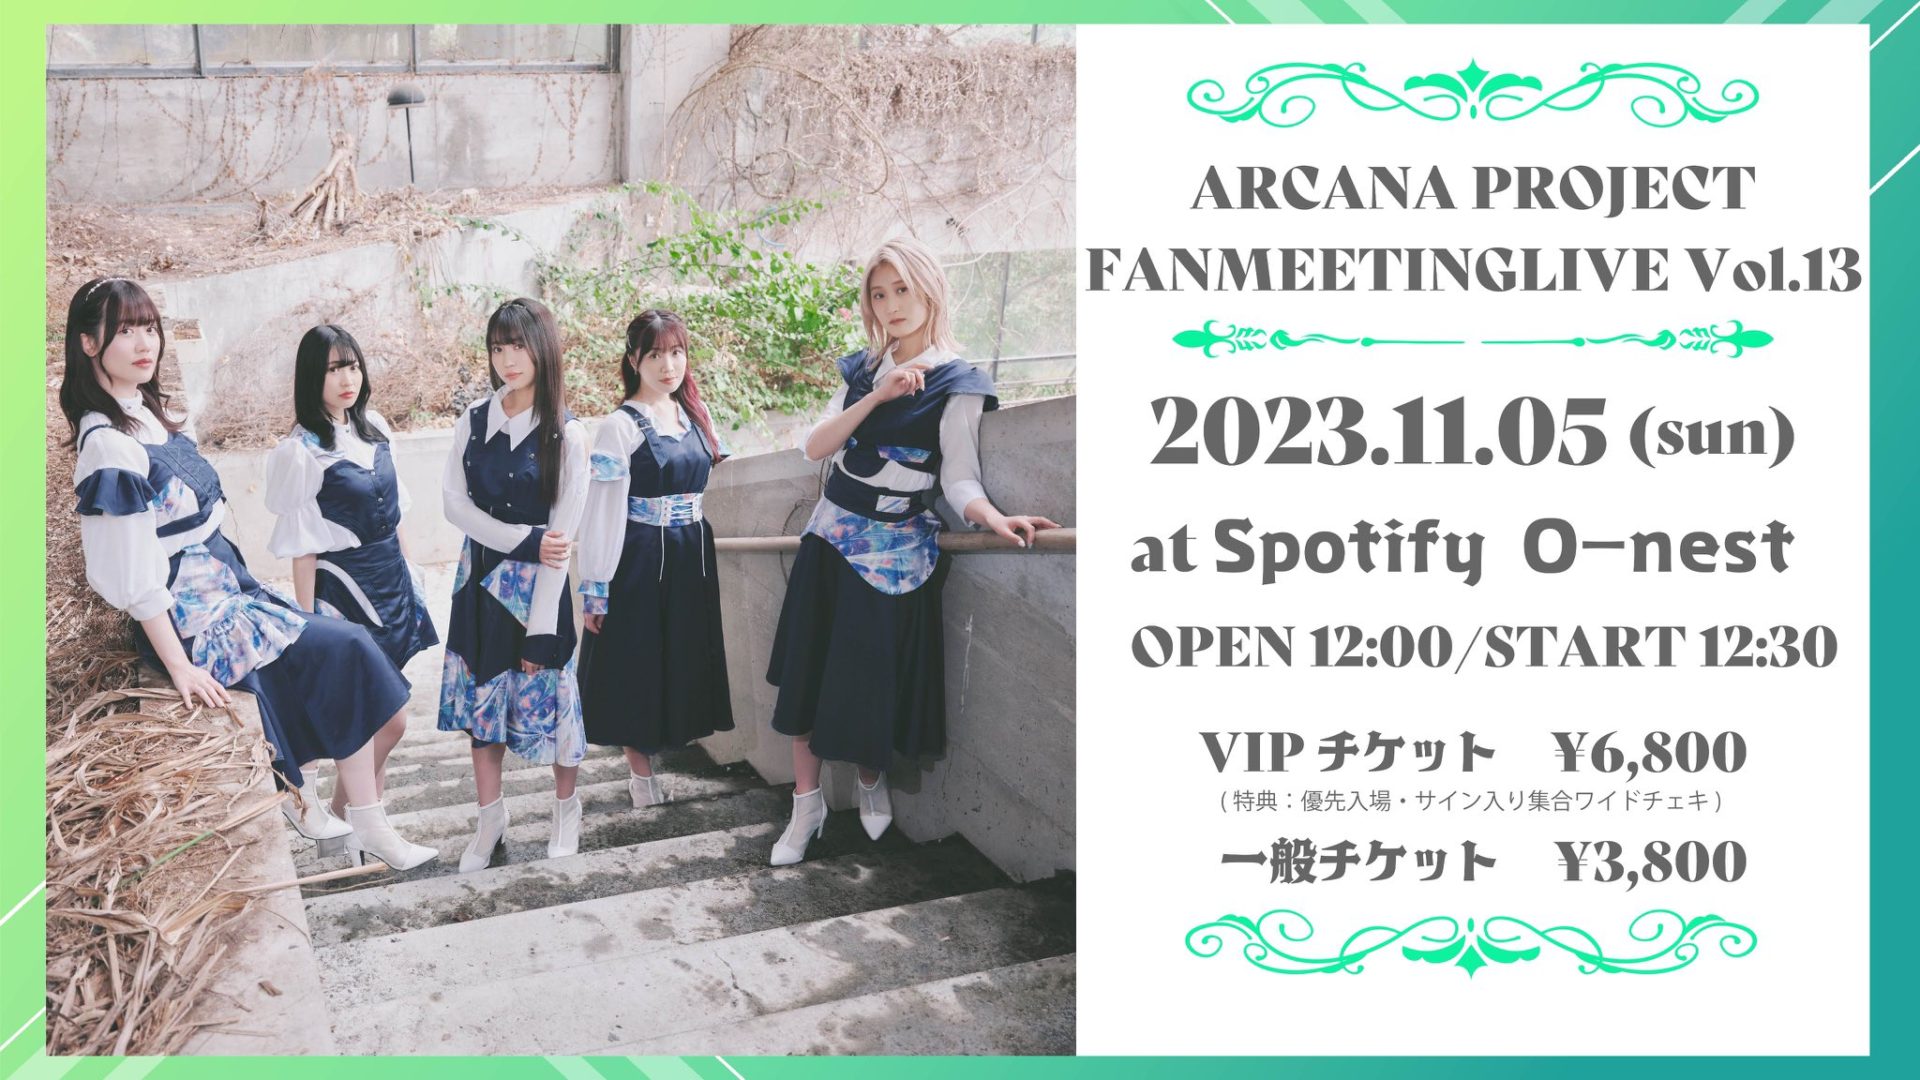 ARCANA PROJECT FANMEETING LIVE Vol.13